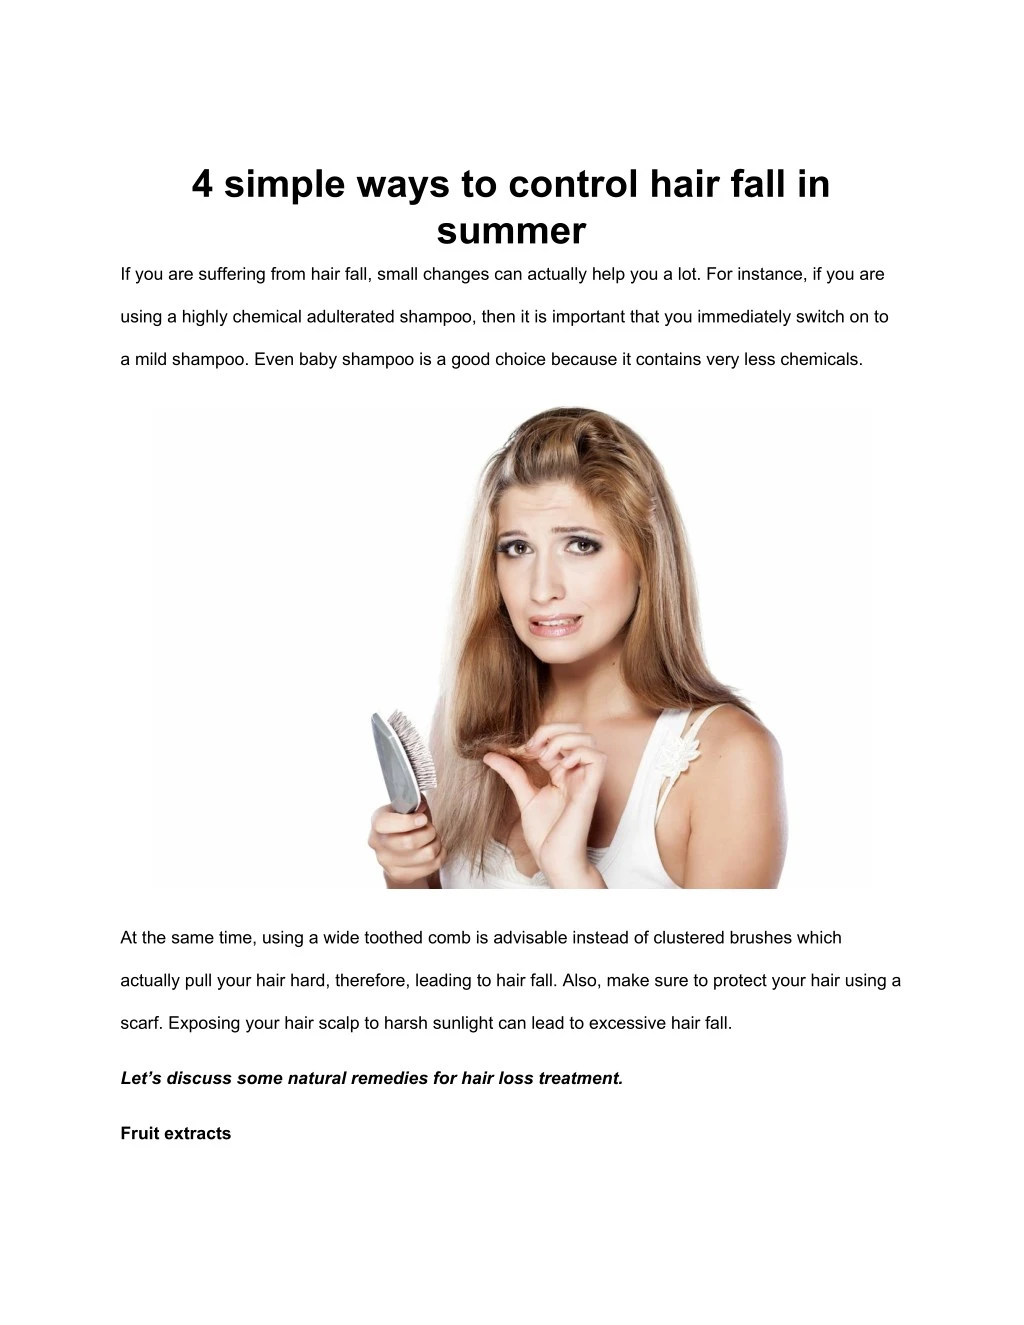 4 simple ways to control hair fall in summer